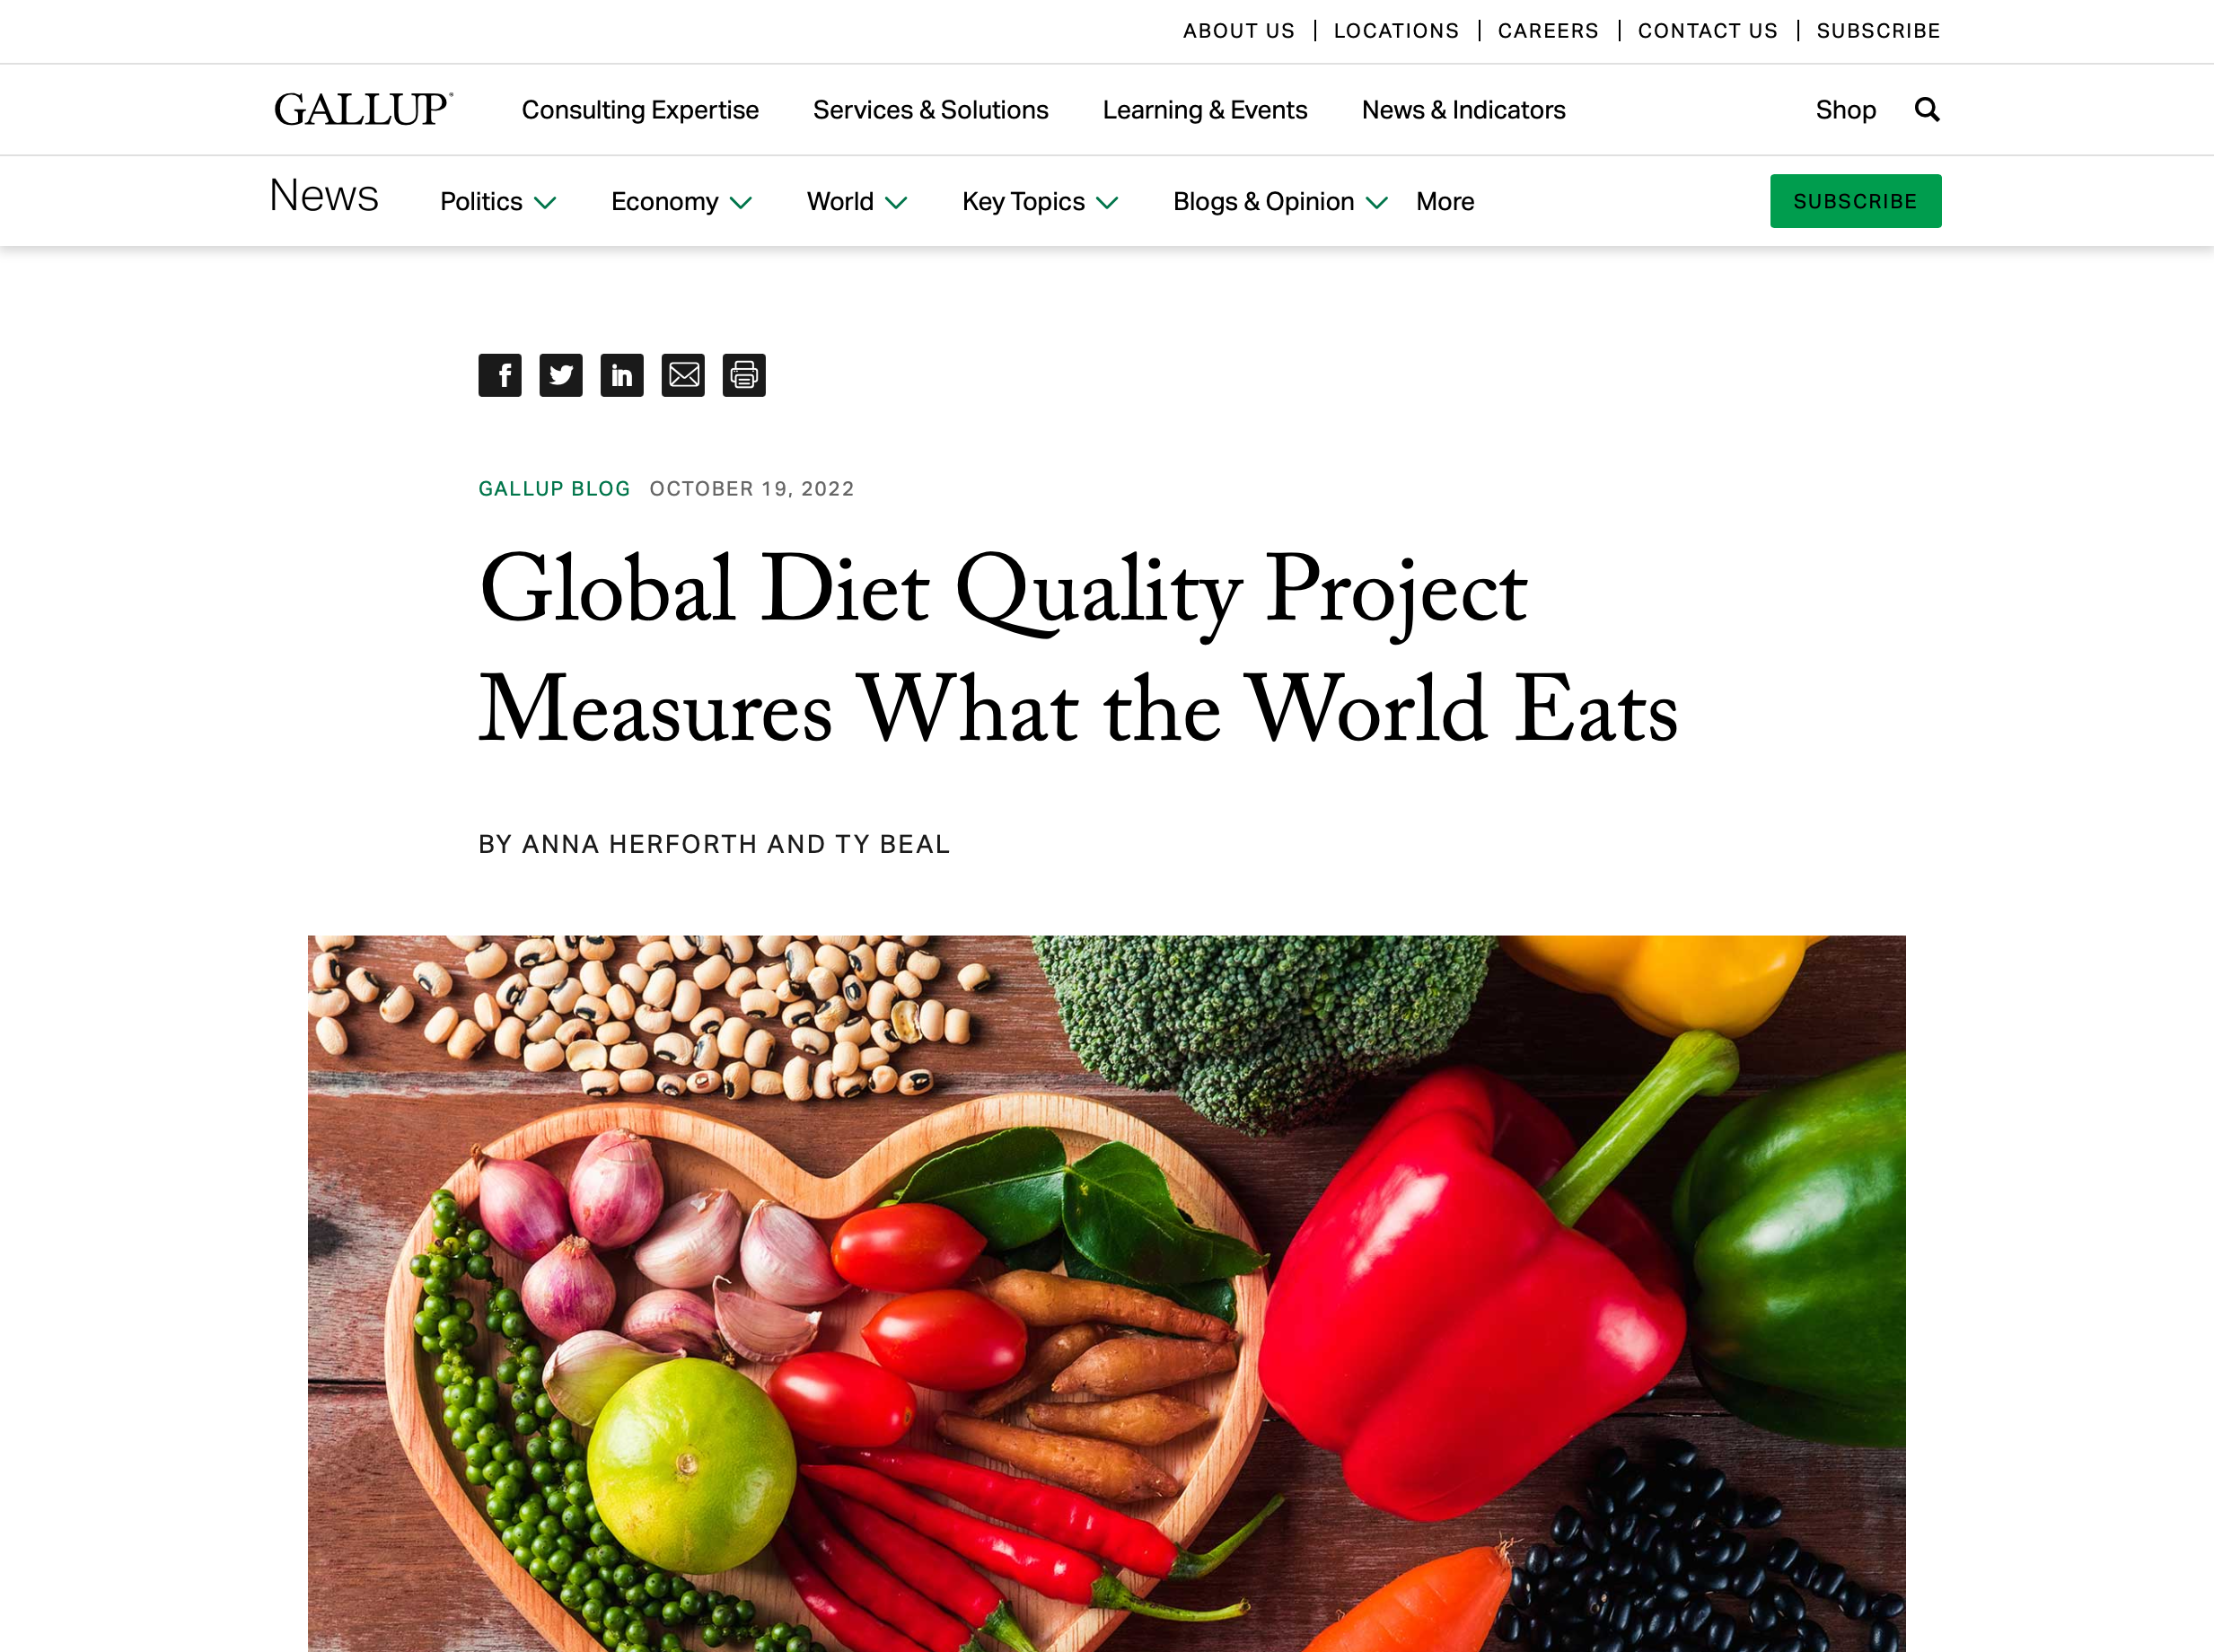 Global Diet Quality Project Measures What the World Eats